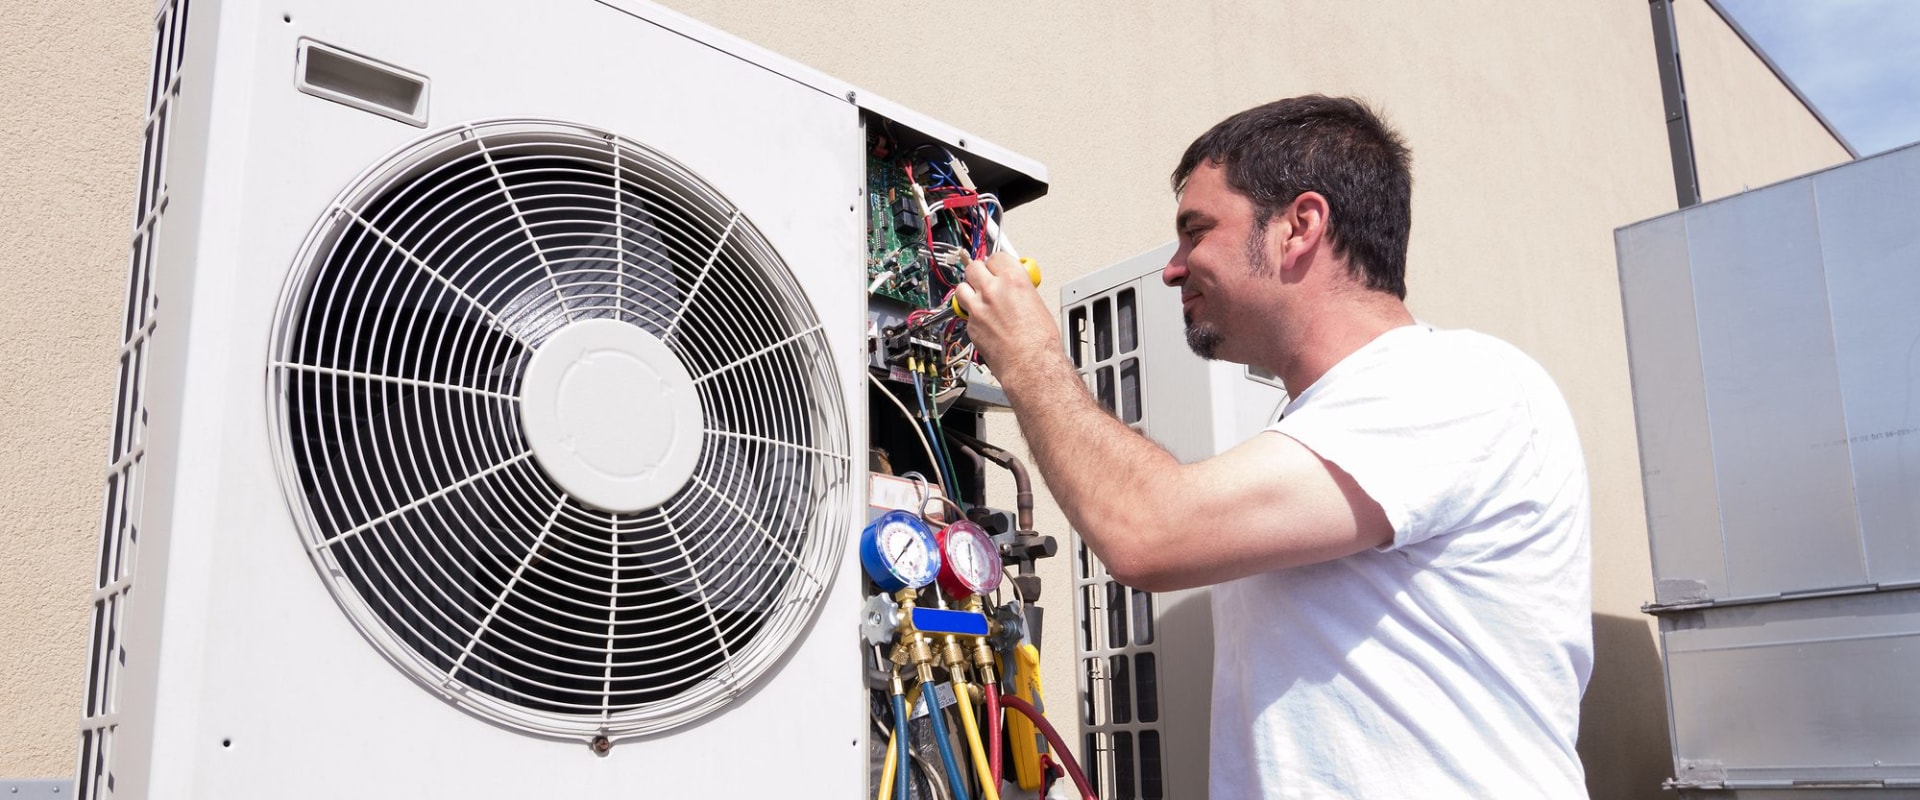 The Benefits of Preventative Maintenance for HVAC Systems: Maximize Efficiency and Prolong Lifespan